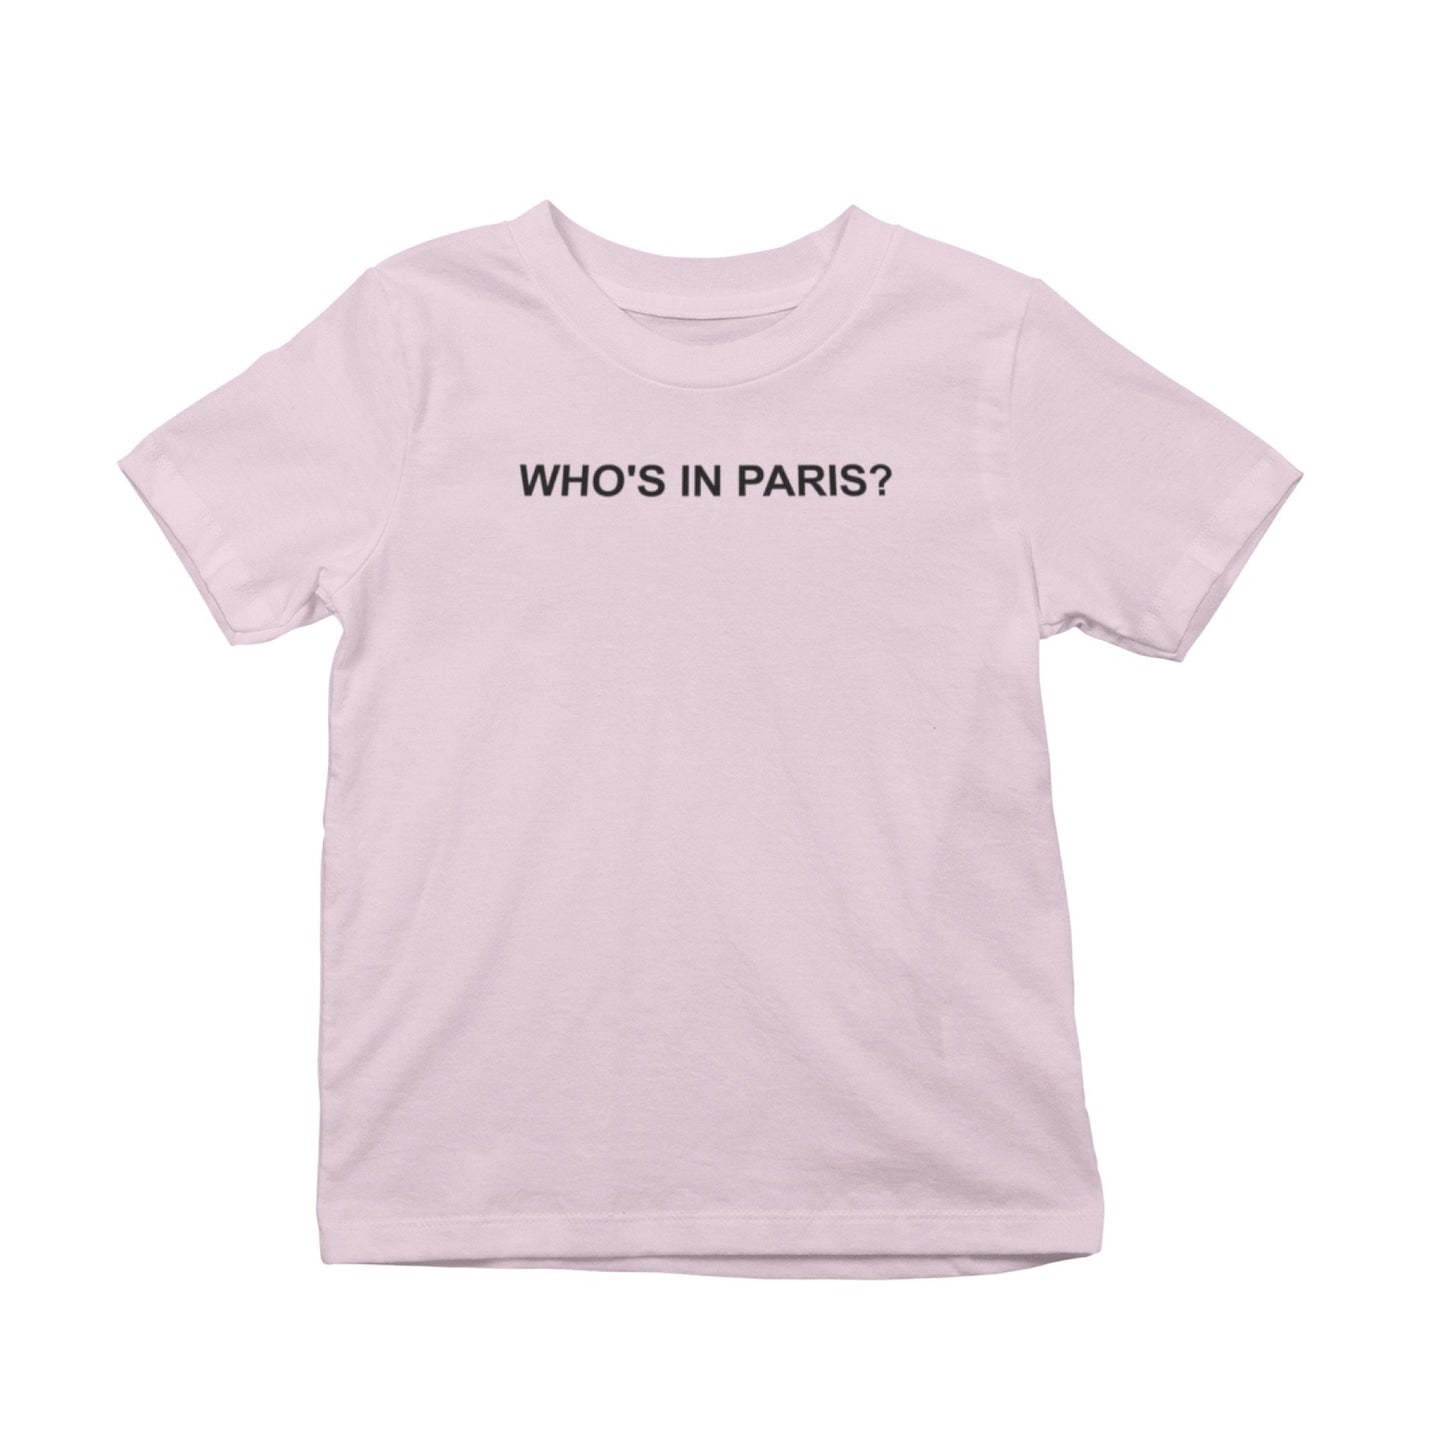 Who's in Paris? T-Shirt